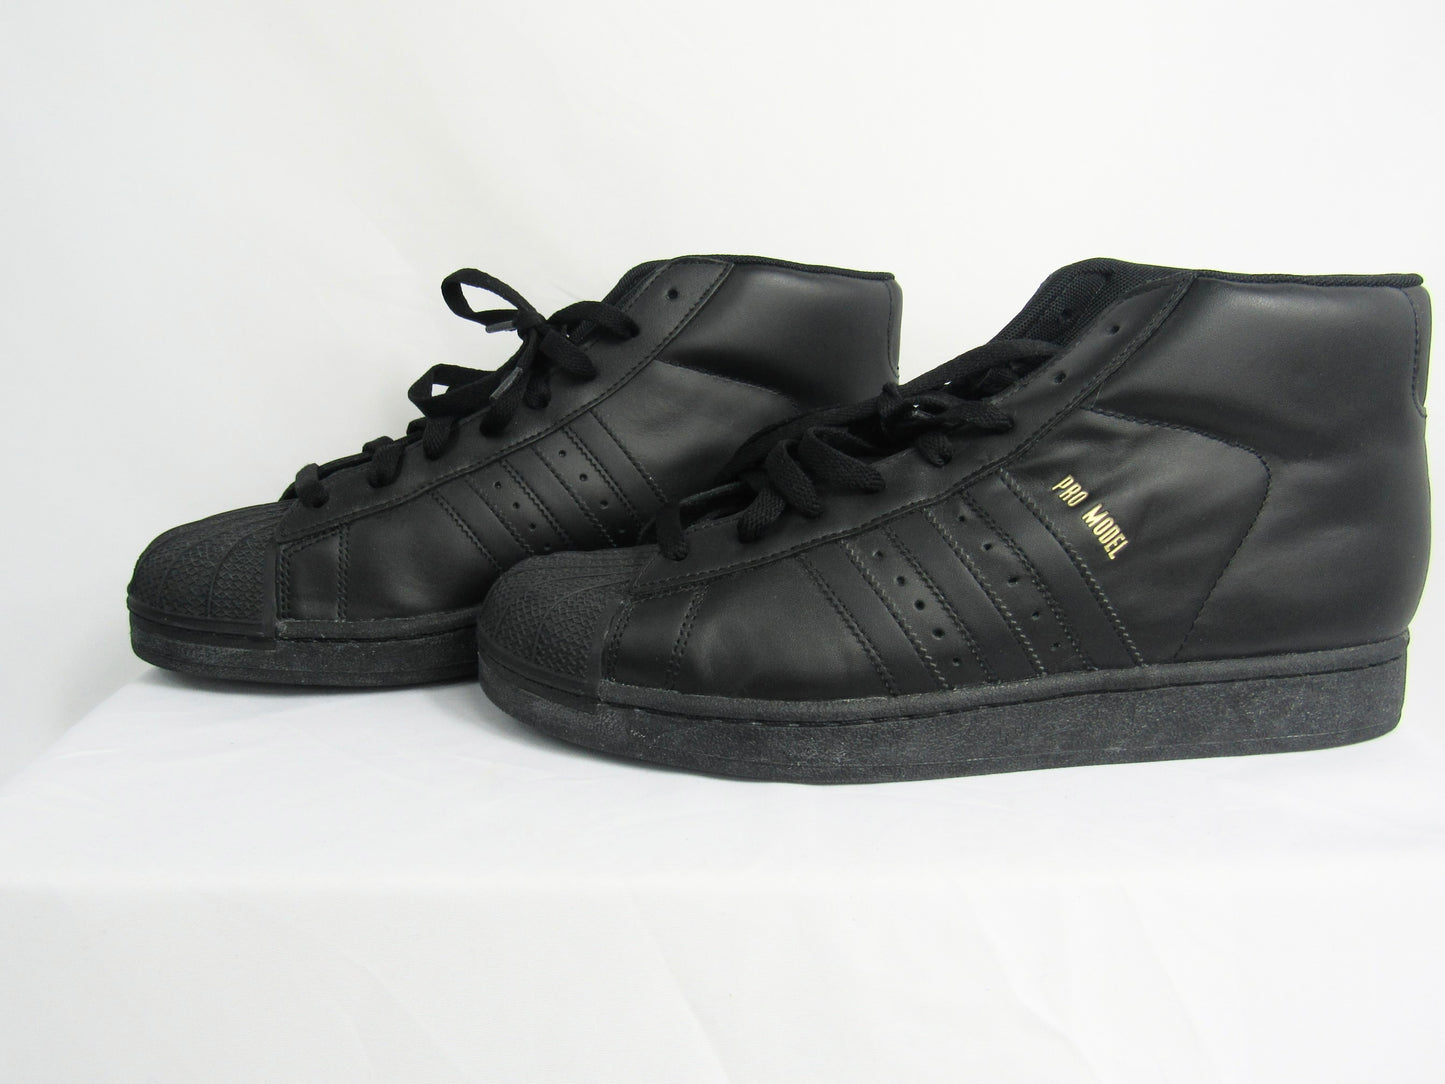 ADIDAS High Top Sneakers - Size 10